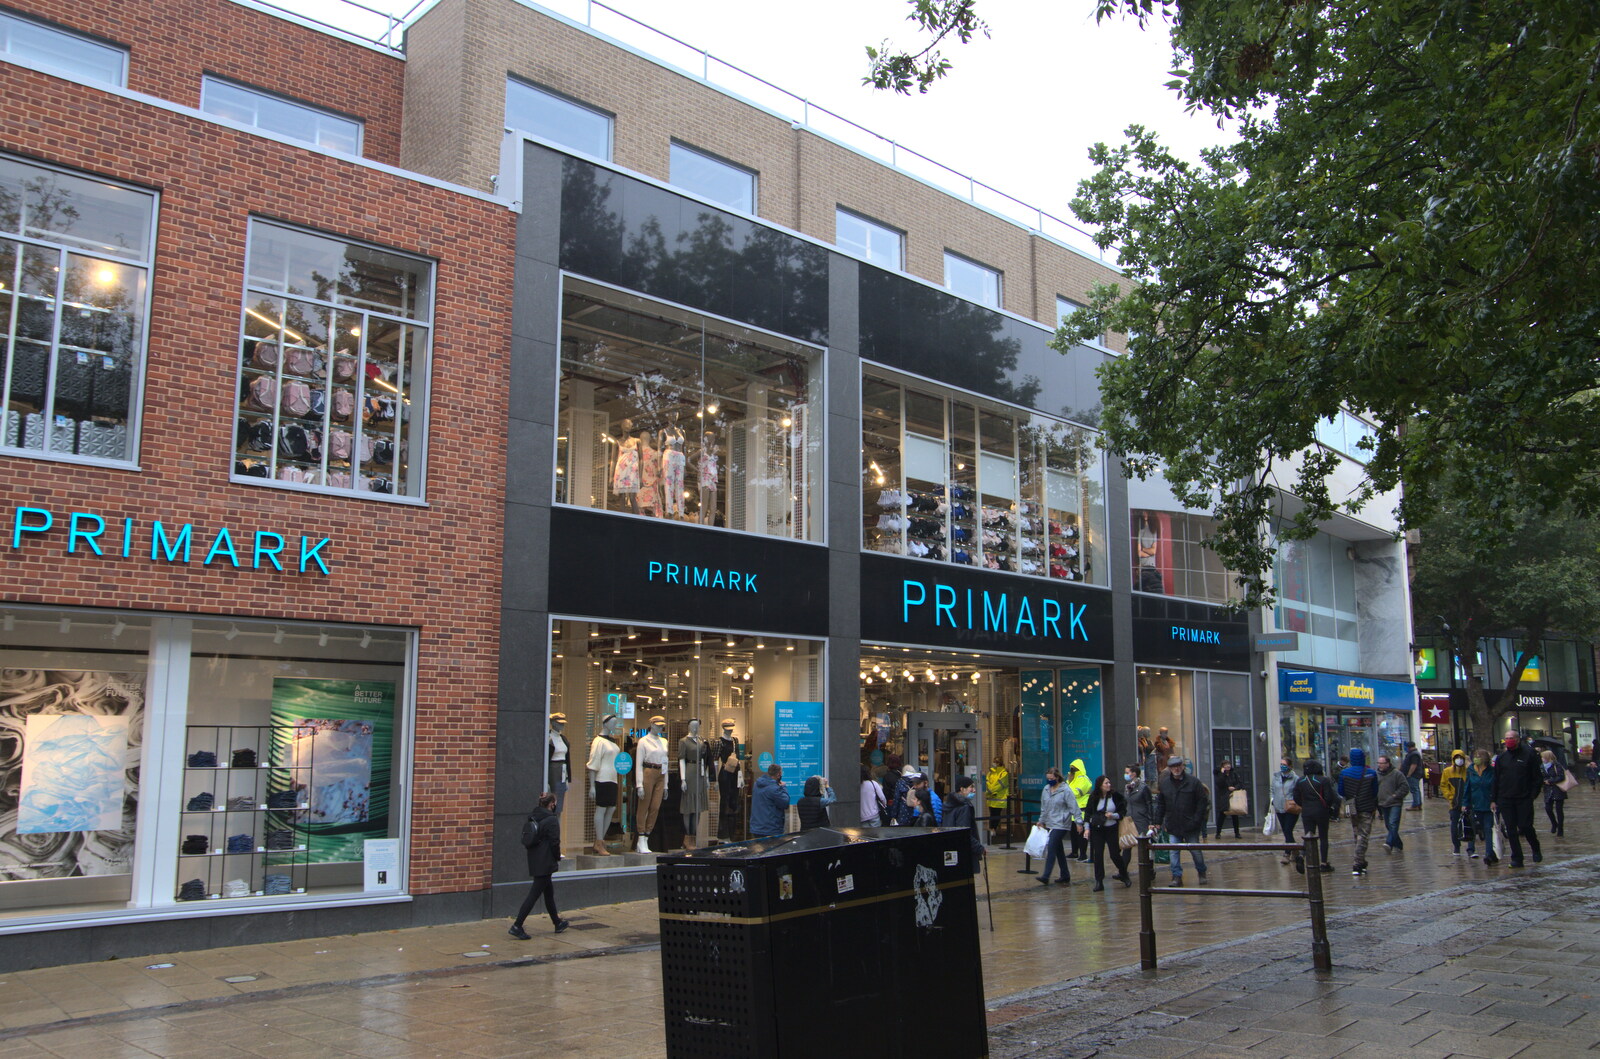 The previous hole in the ground is now a Primark from A Trip to Norwich, Norfolk - 27th September 2020